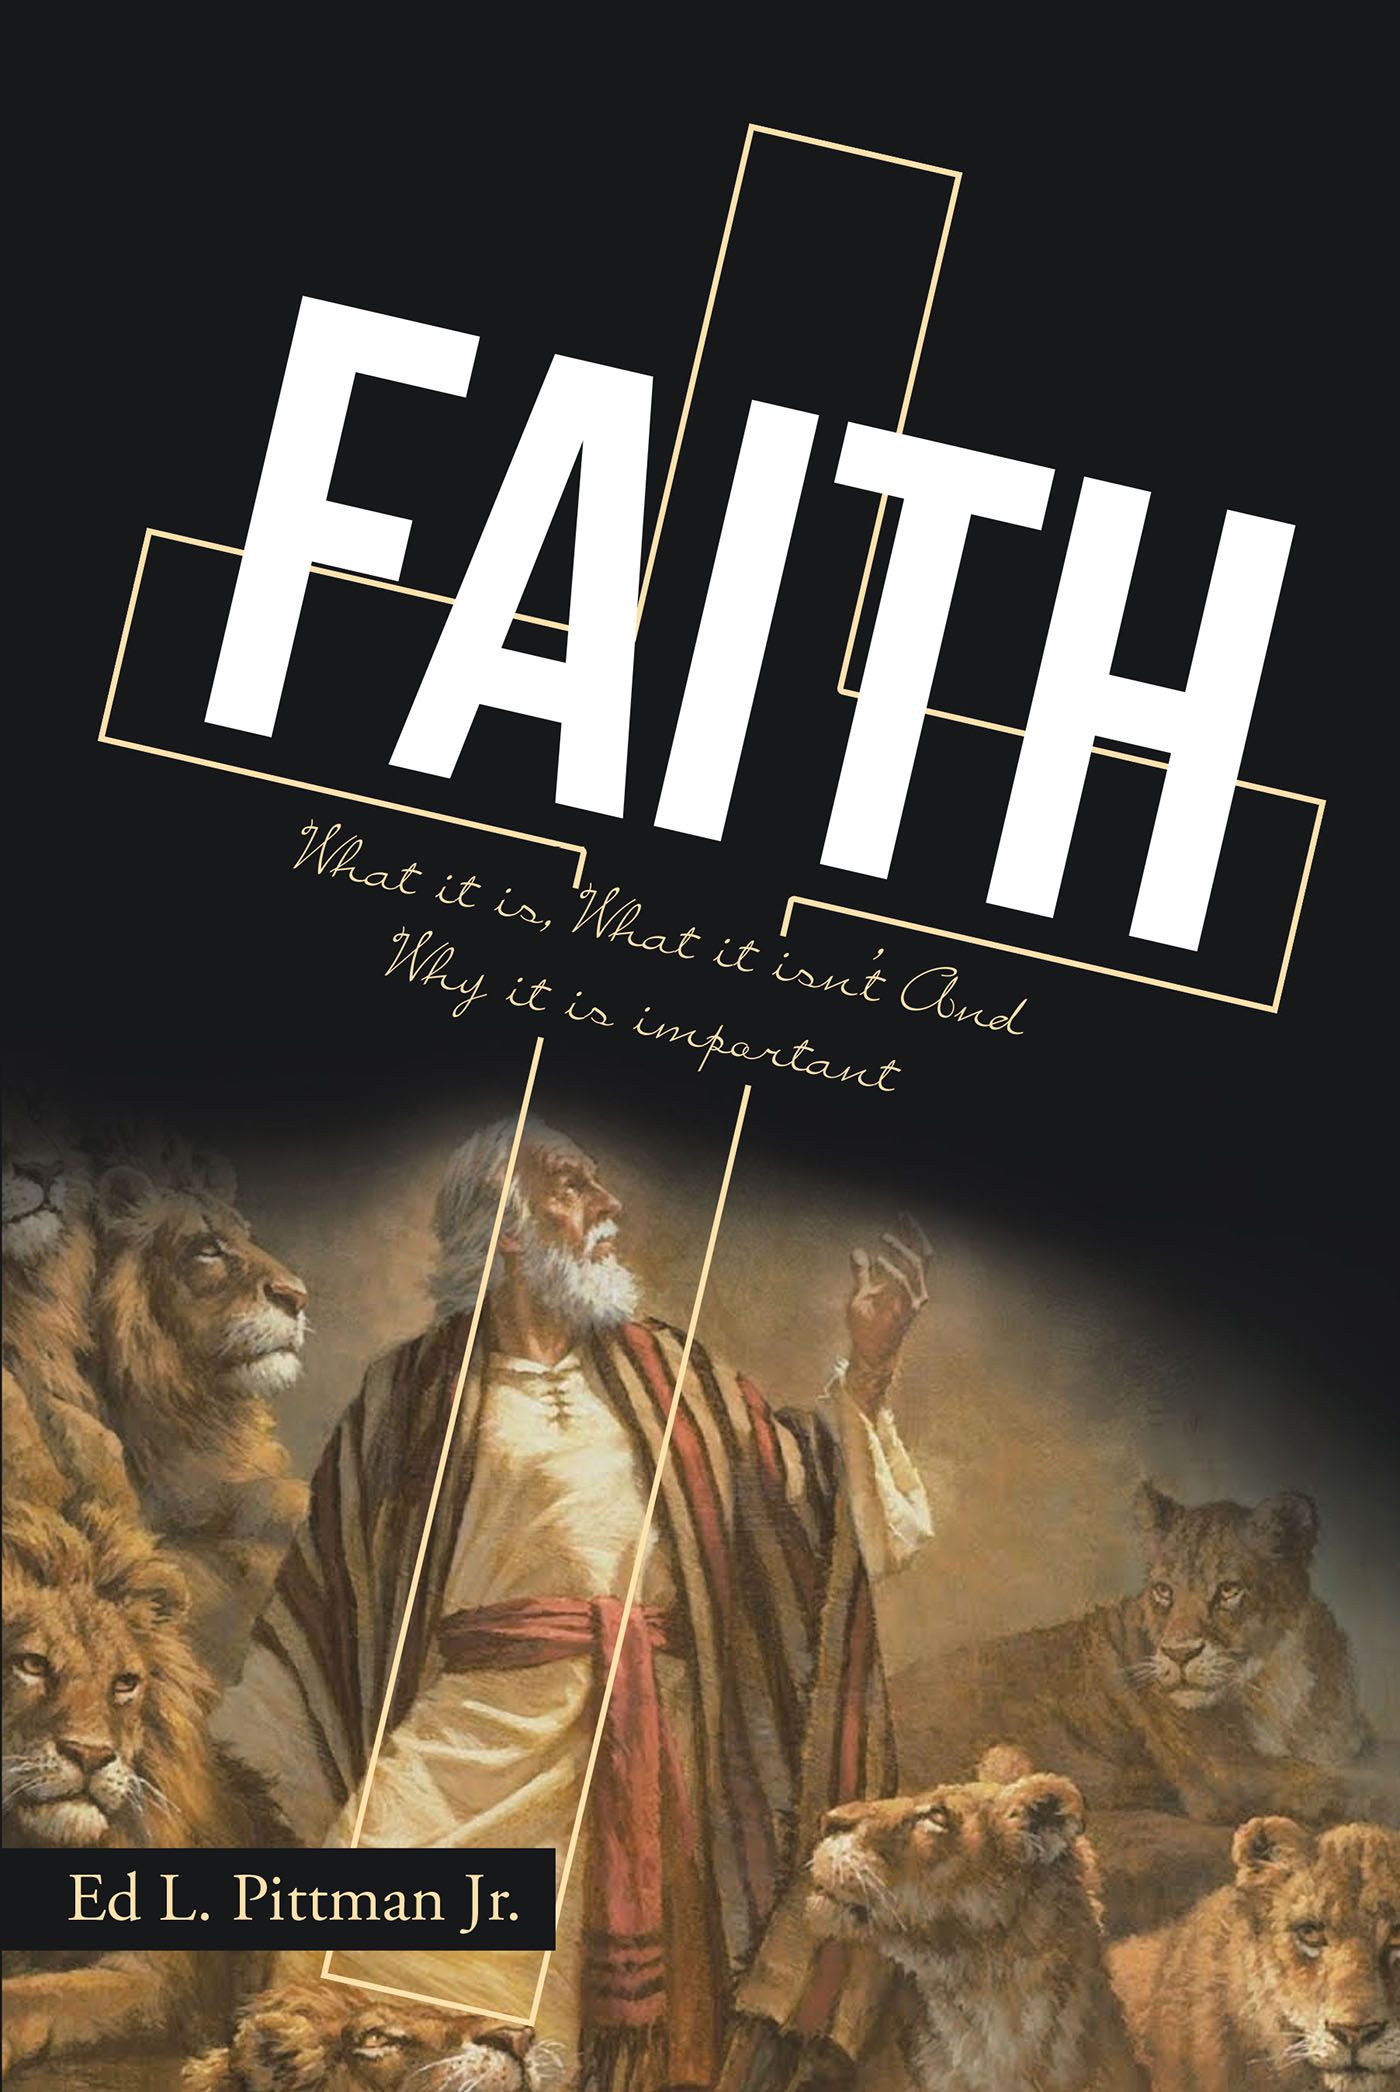 The E. Q. reccomend in Experience faith mature grounded god